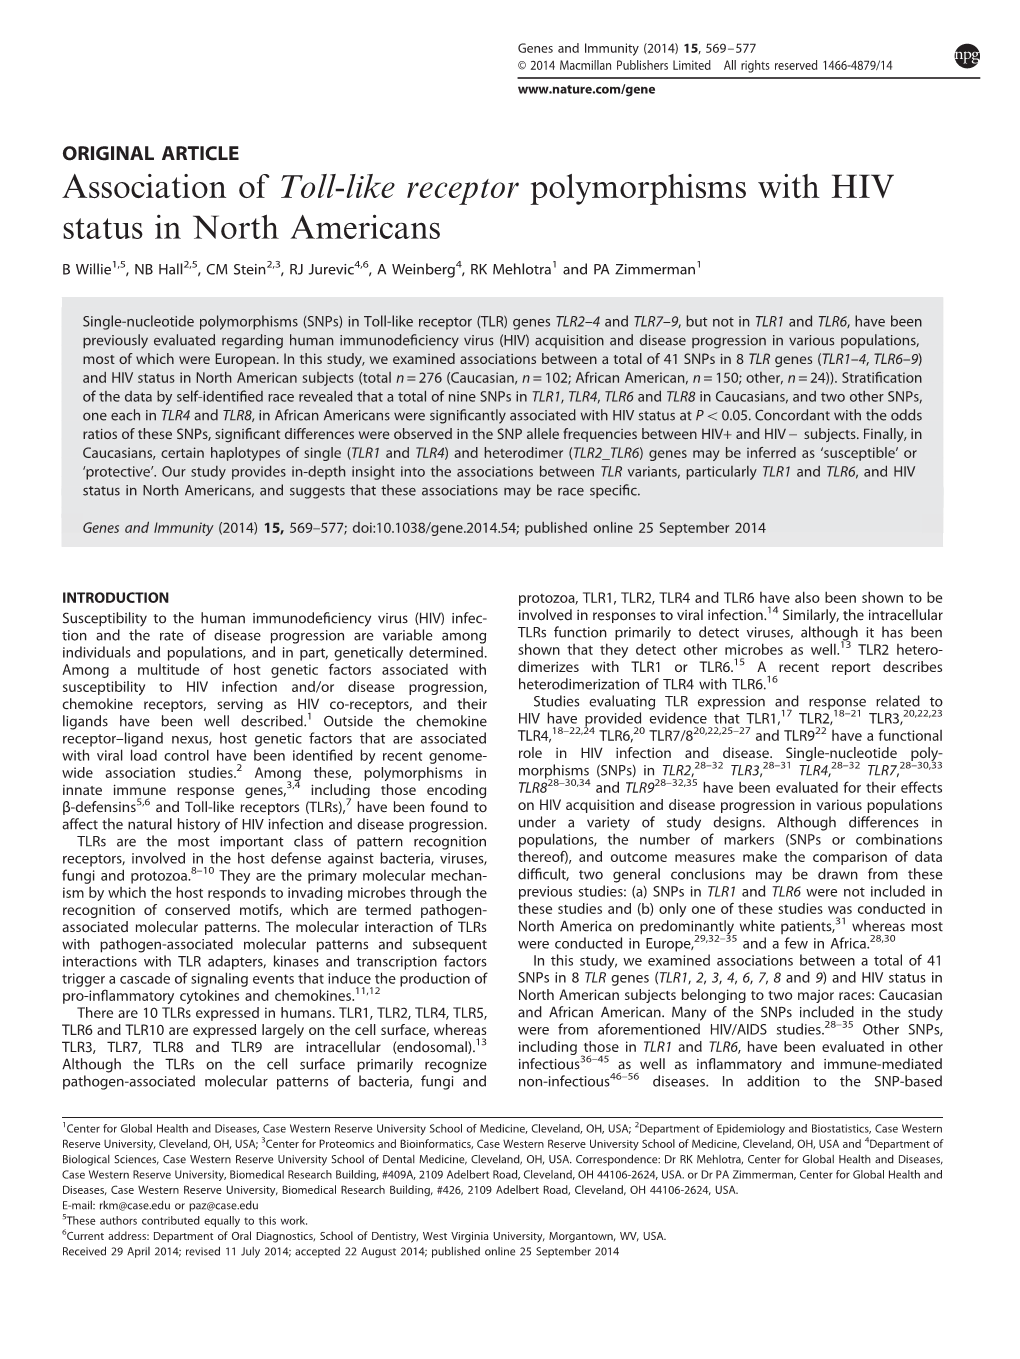 Association of Toll-Like Receptor Polymorphisms with HIV Status in North Americans